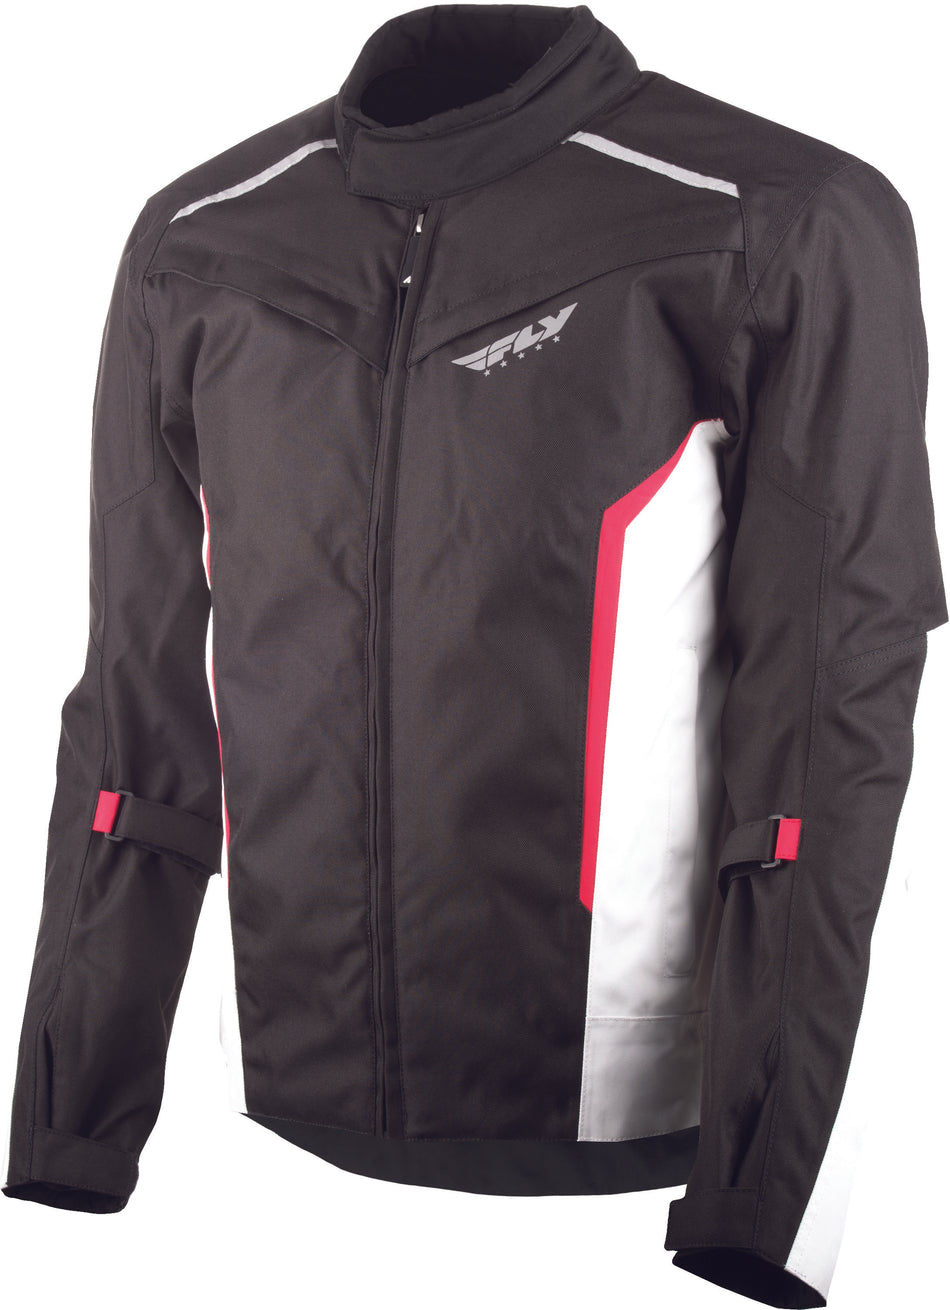 FLY RACING Baseline Jacket Black/White/Red Xl #5958 477-2091~5